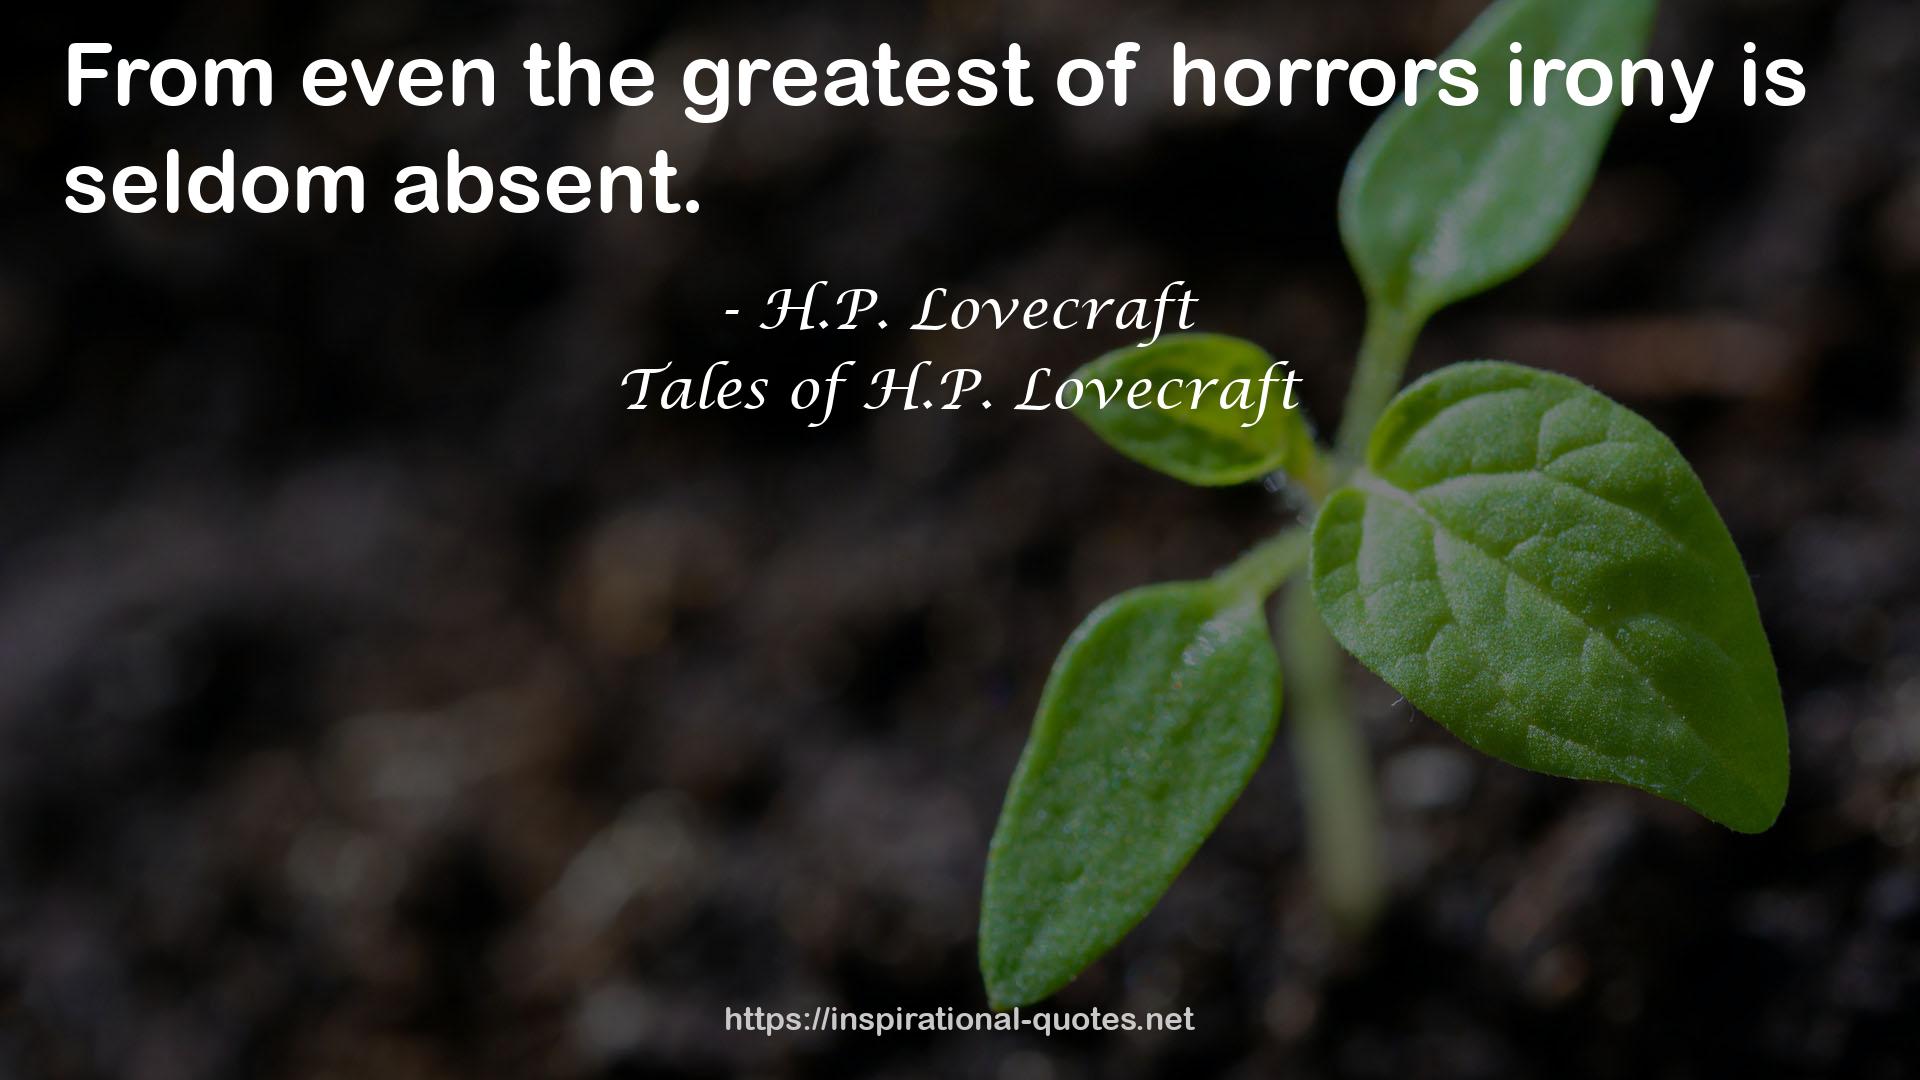 Tales of H.P. Lovecraft QUOTES